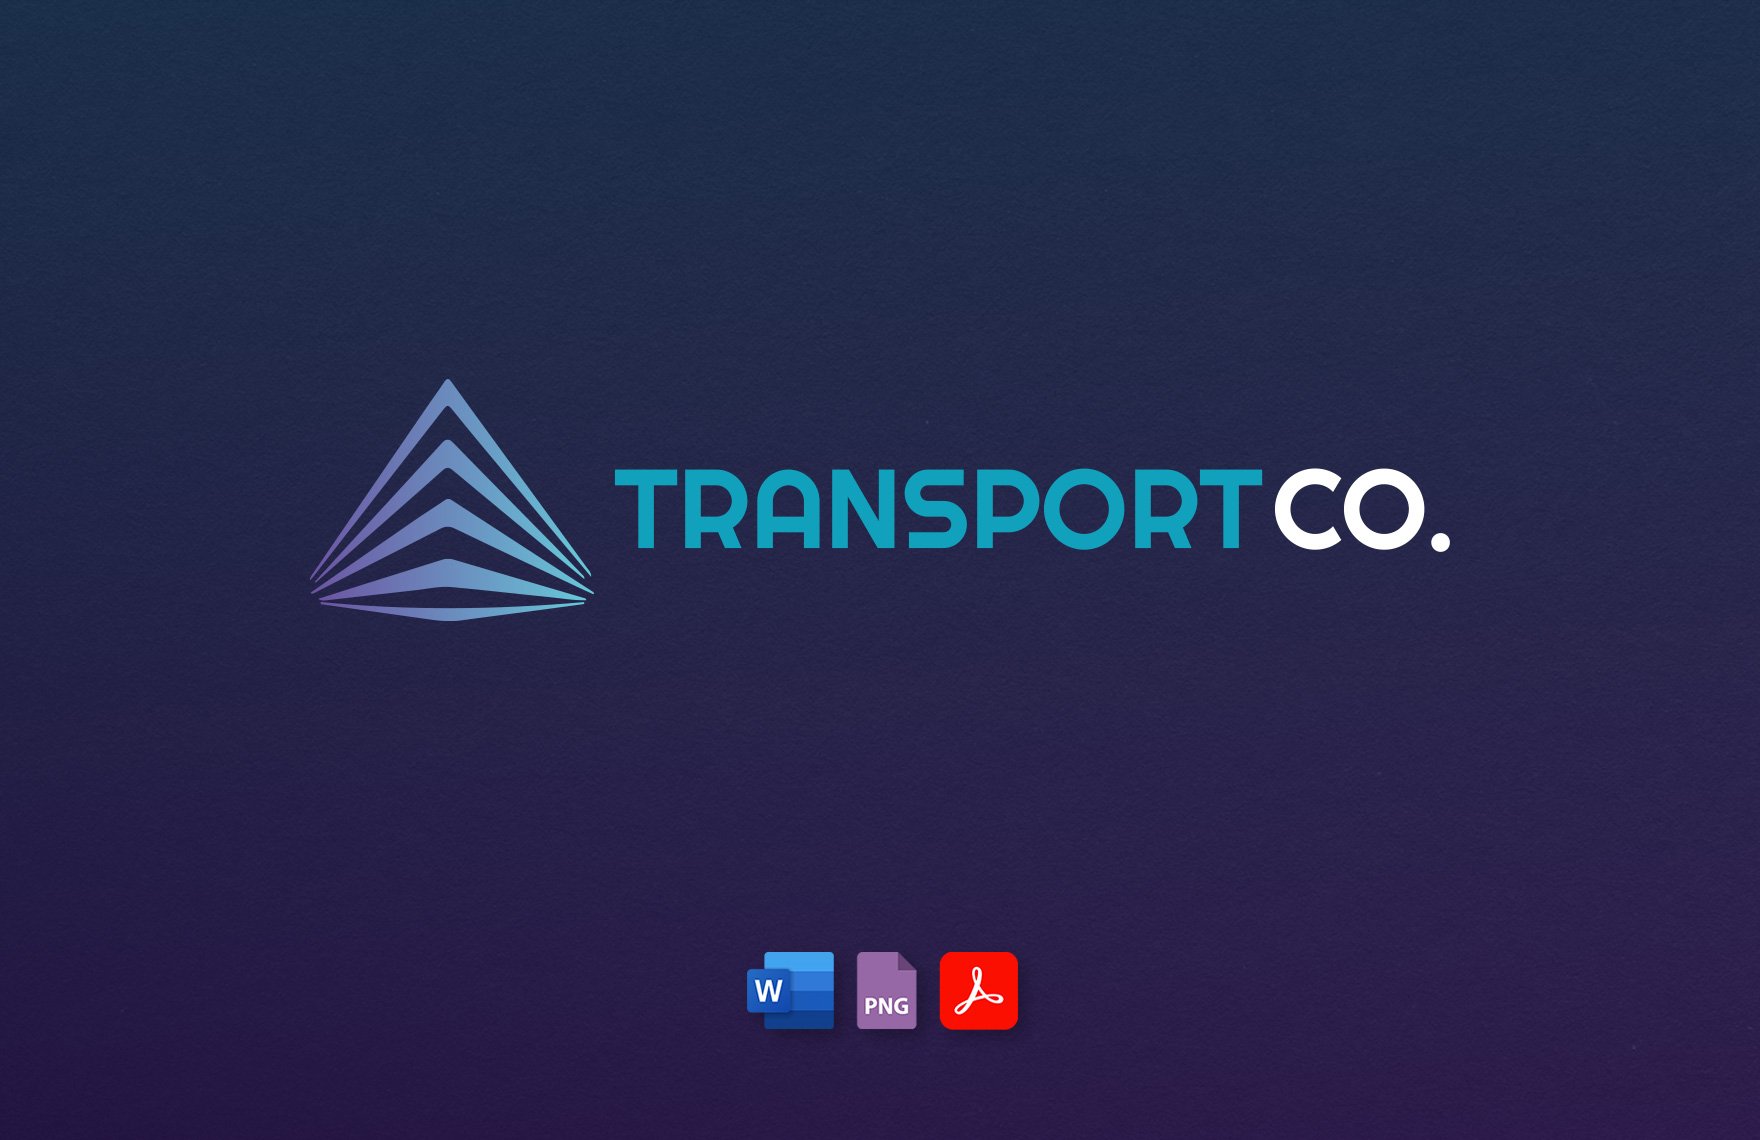 Free Transport and Logistics Tech-Driven Transportation Logo Template in Word, PDF, PNG